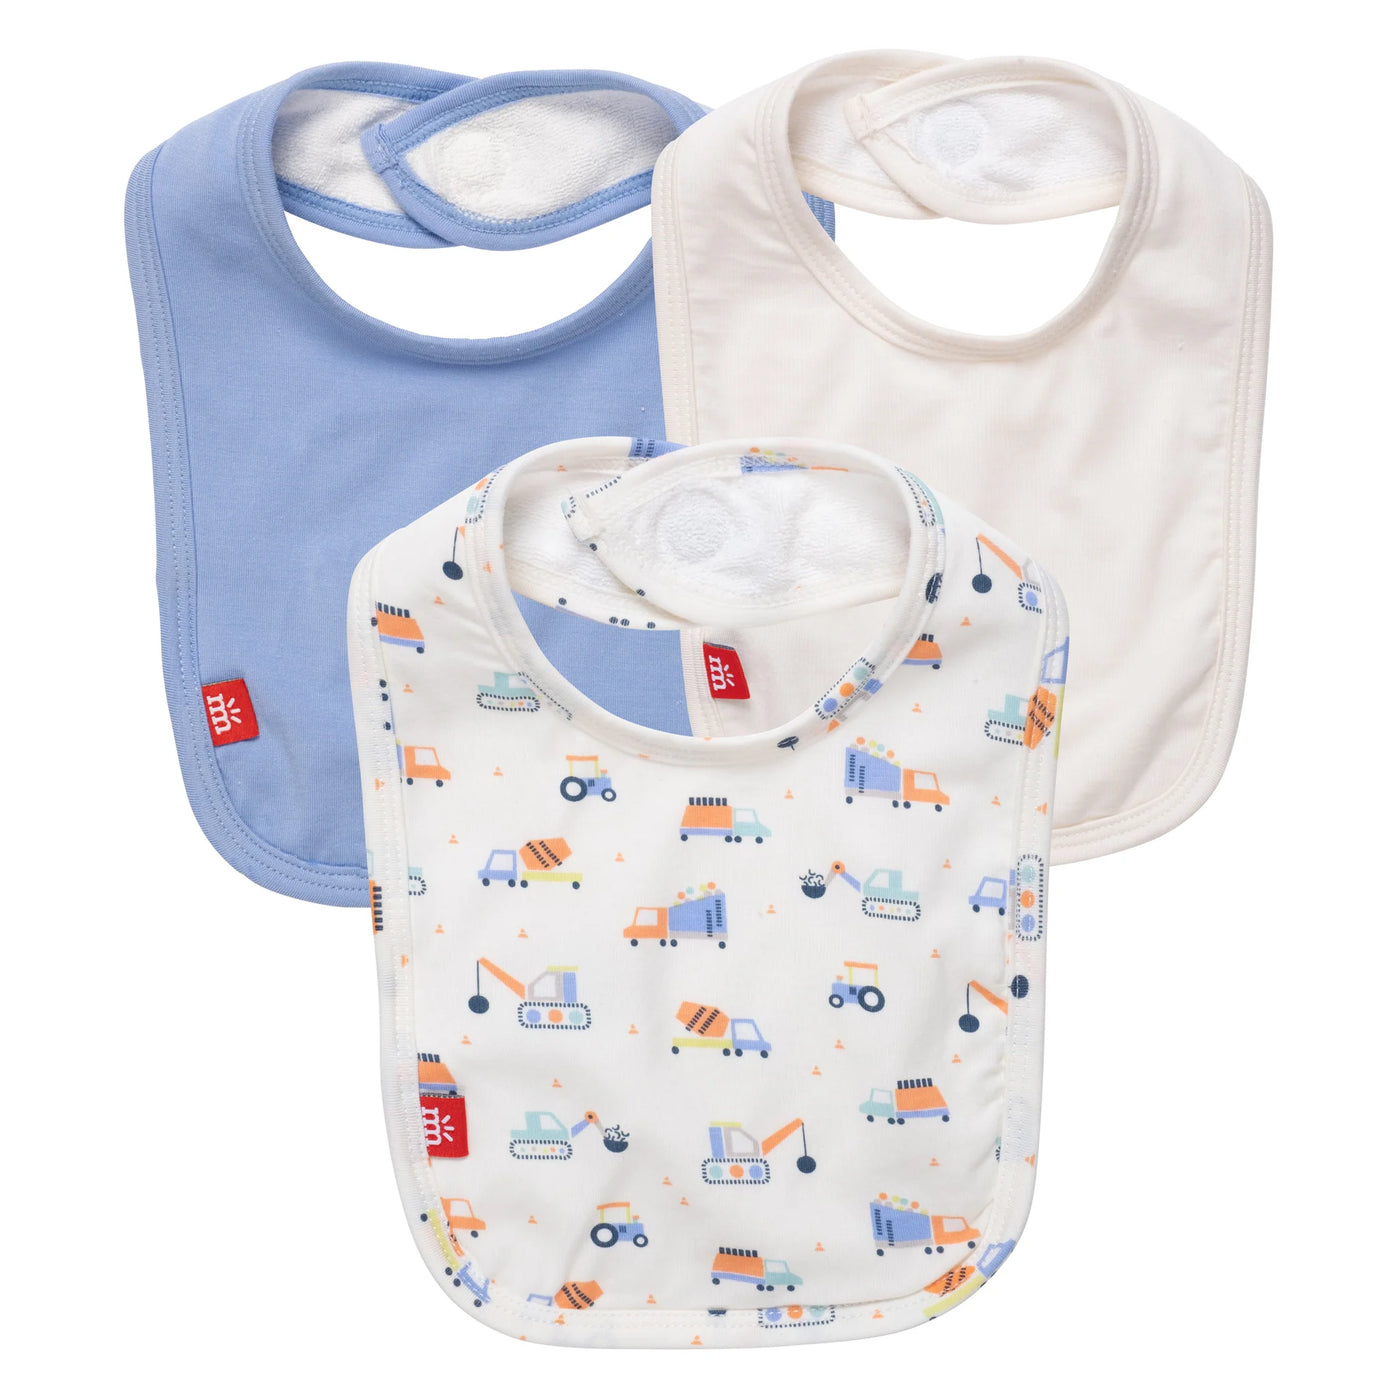 Can You Dig It 3pack Bibs